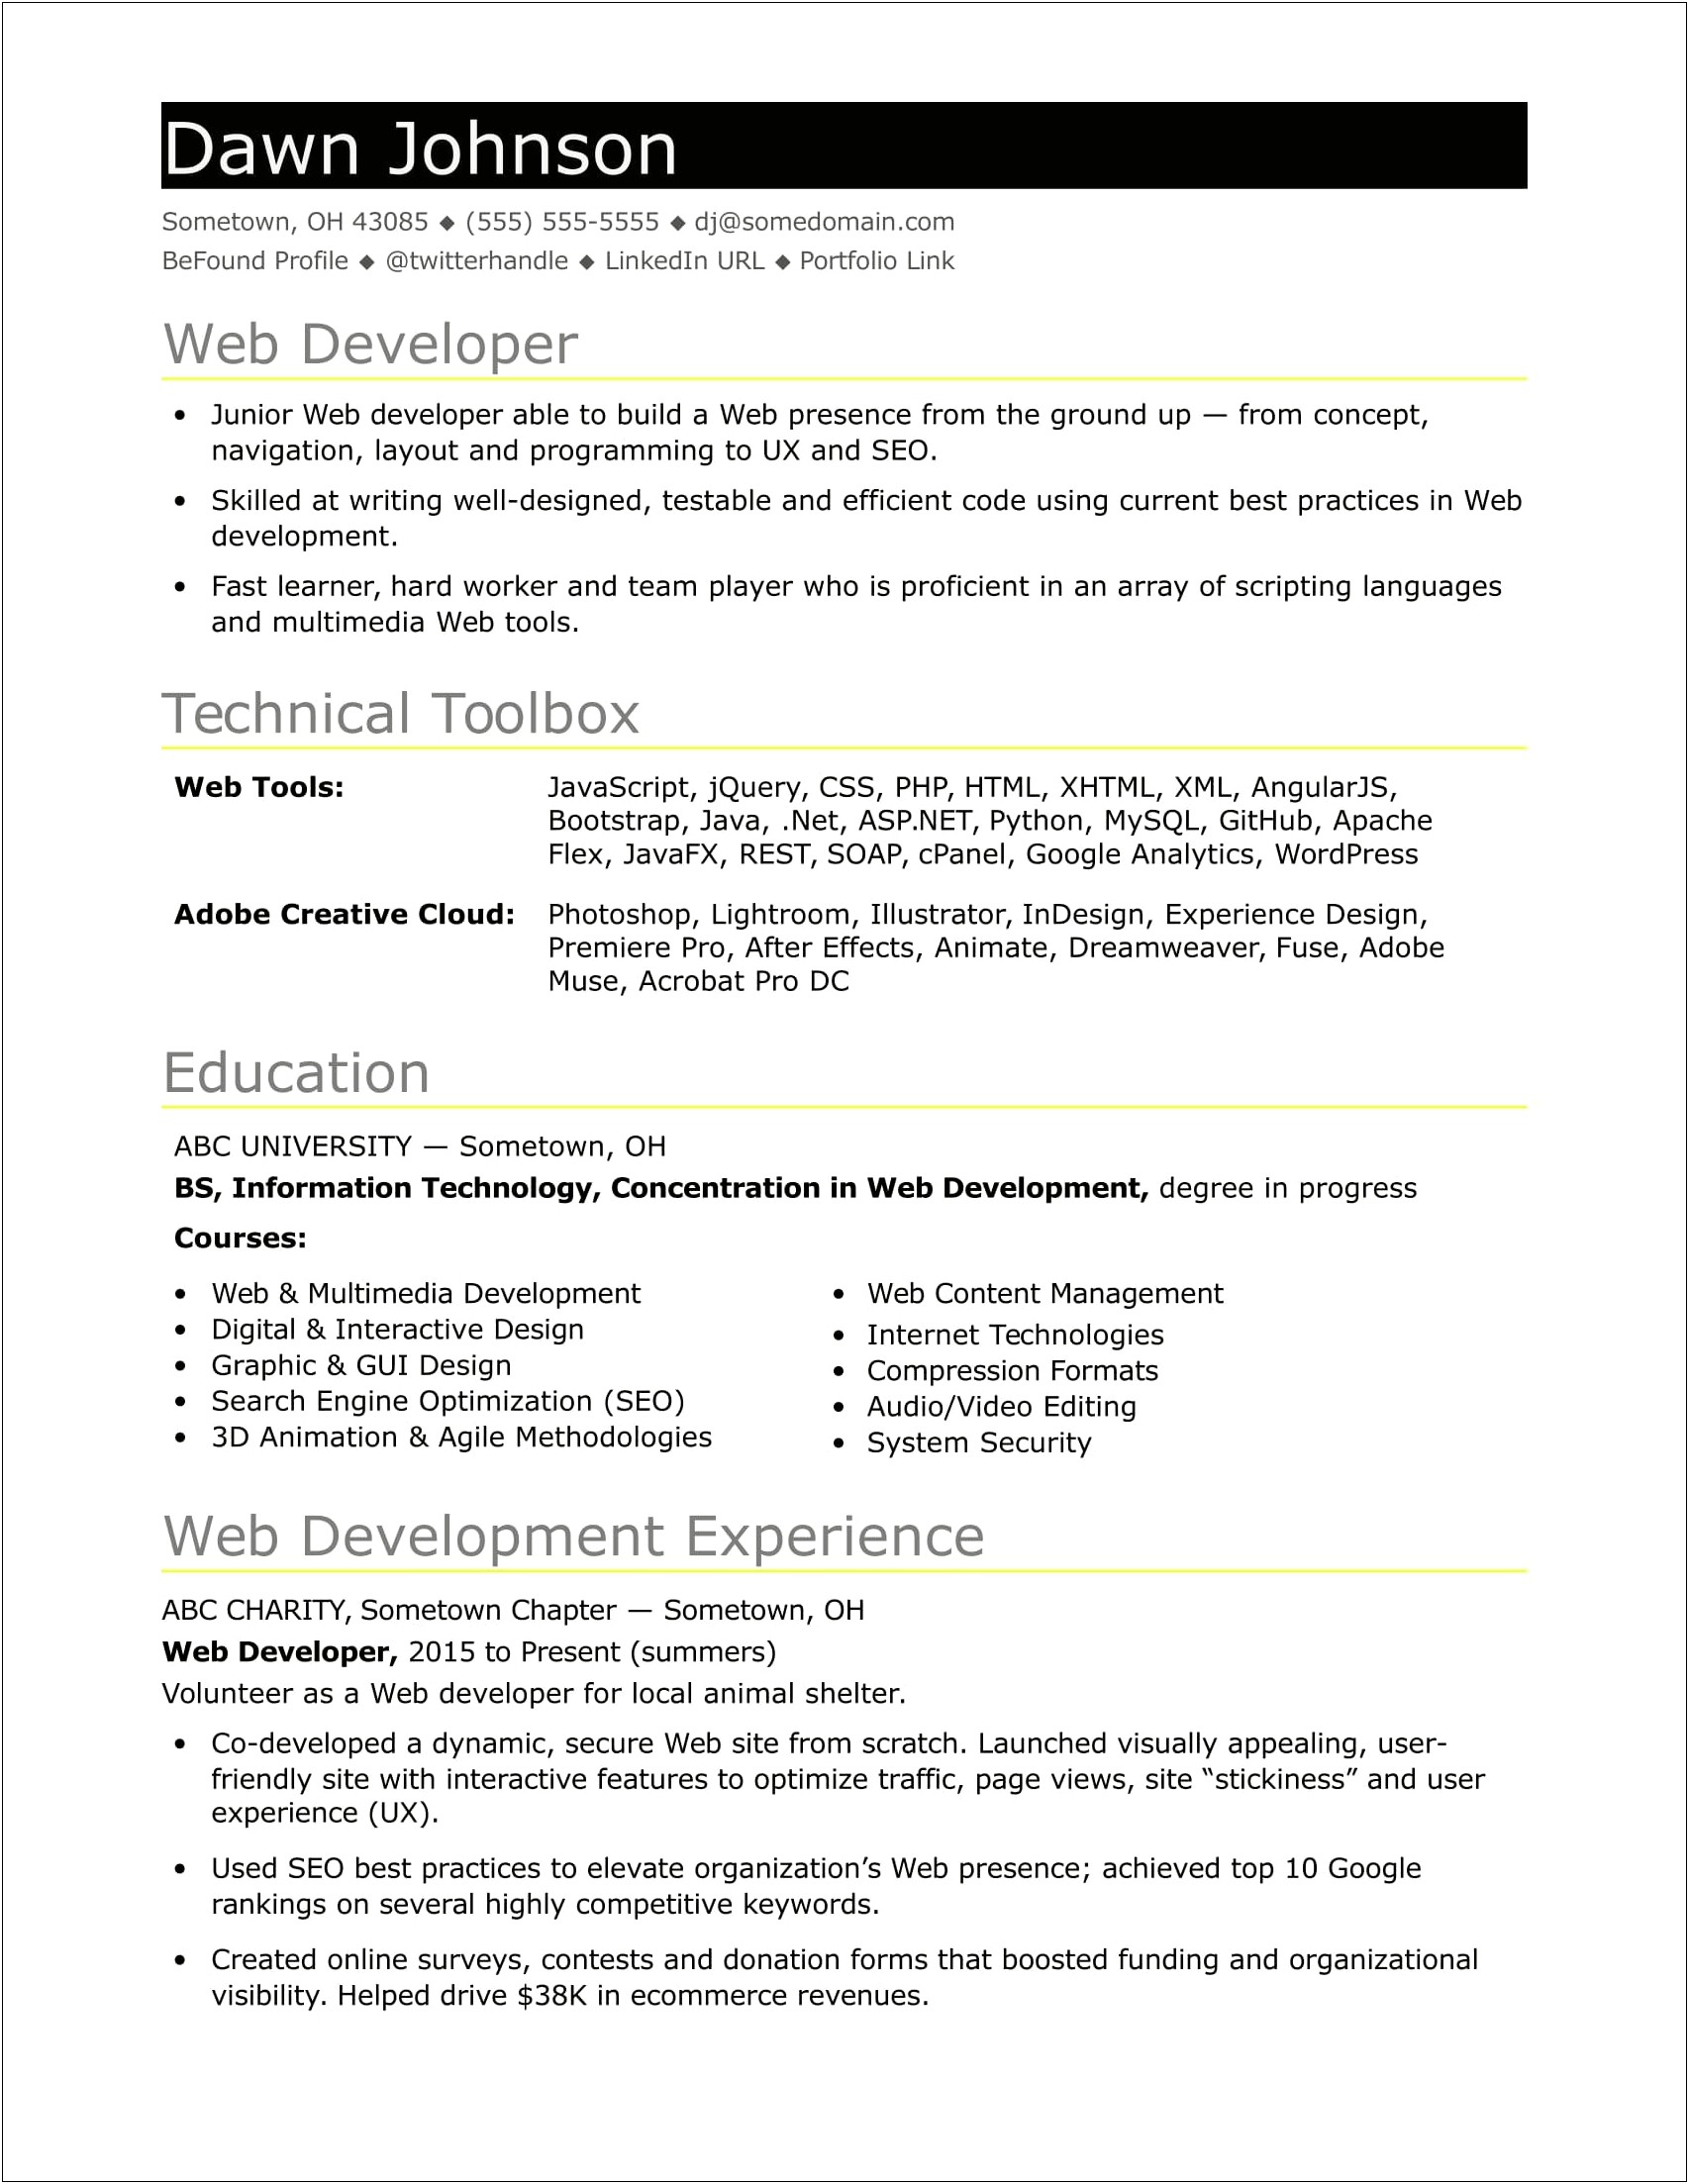 Work Experience To Include For Web Dev Resume